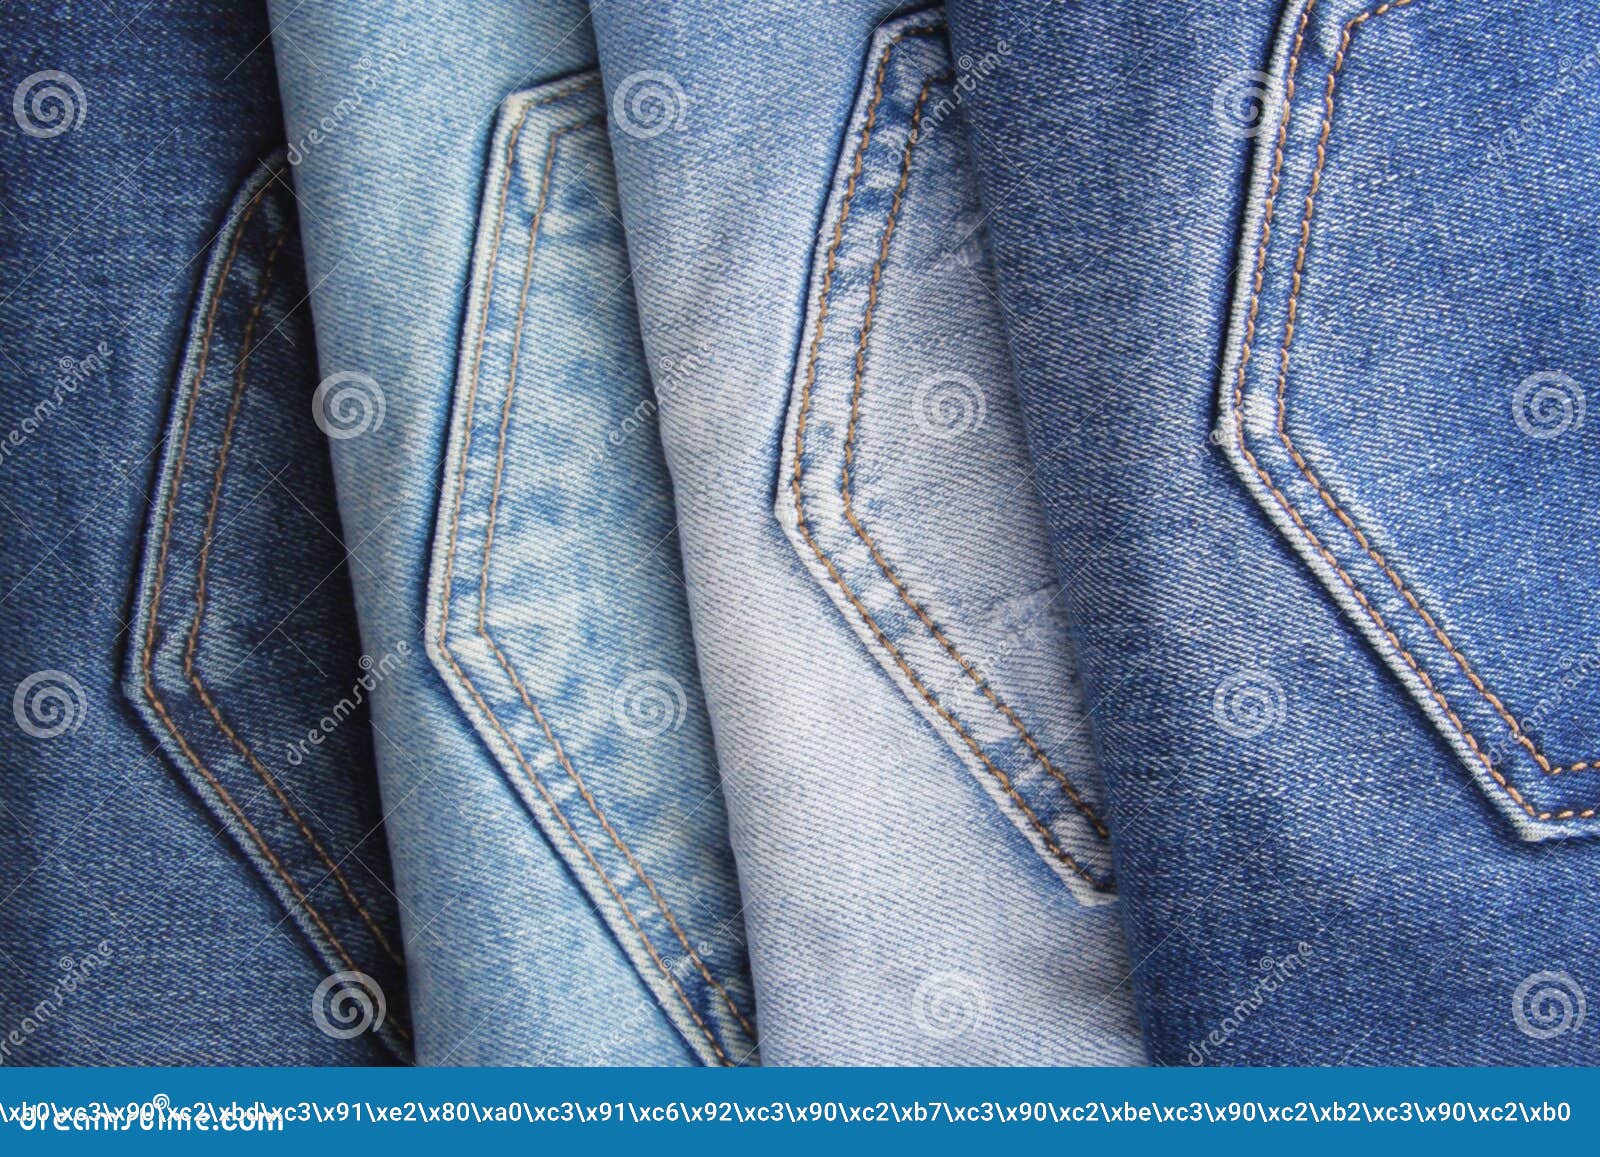 Why Is Denim Blue? History Behind the Color of Jeans | Trusted Since 1922